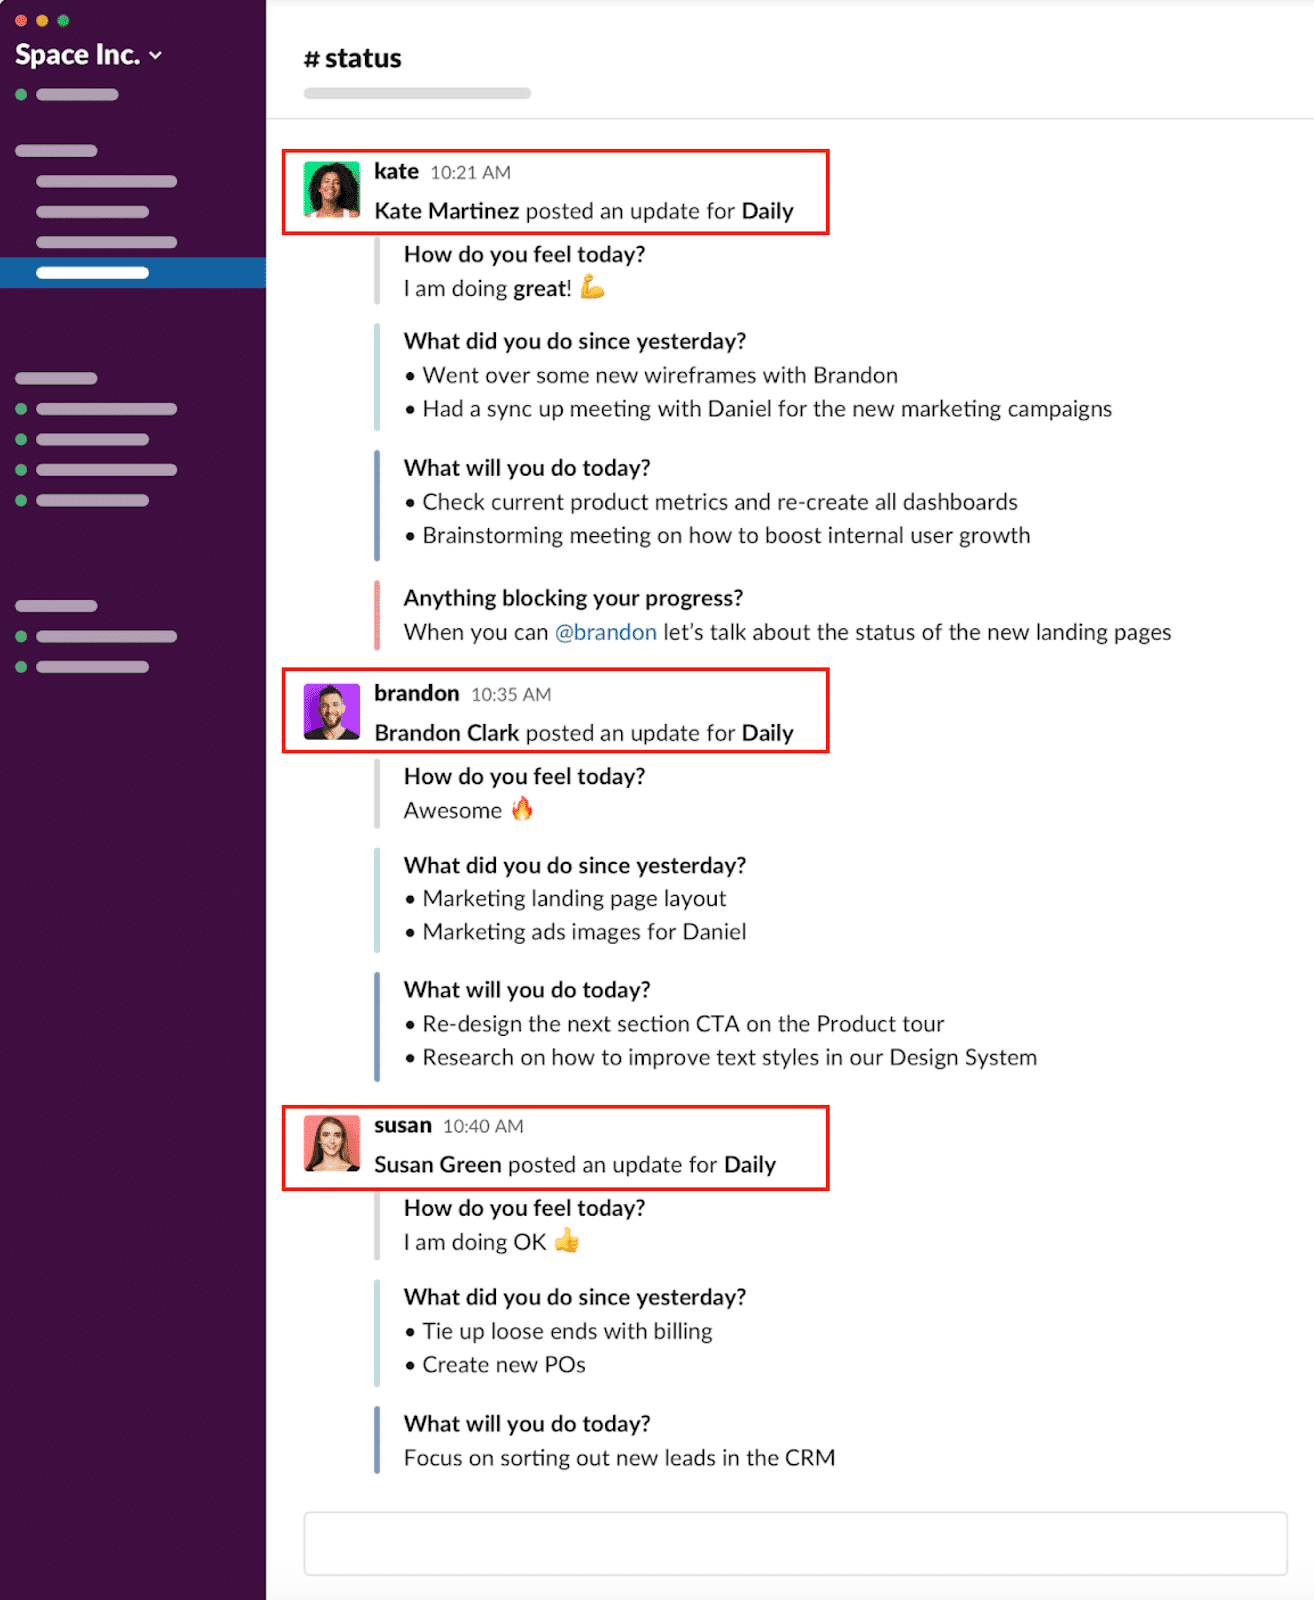 When your team posts their daily update responses, they are added to the slack channel for everyone to see.